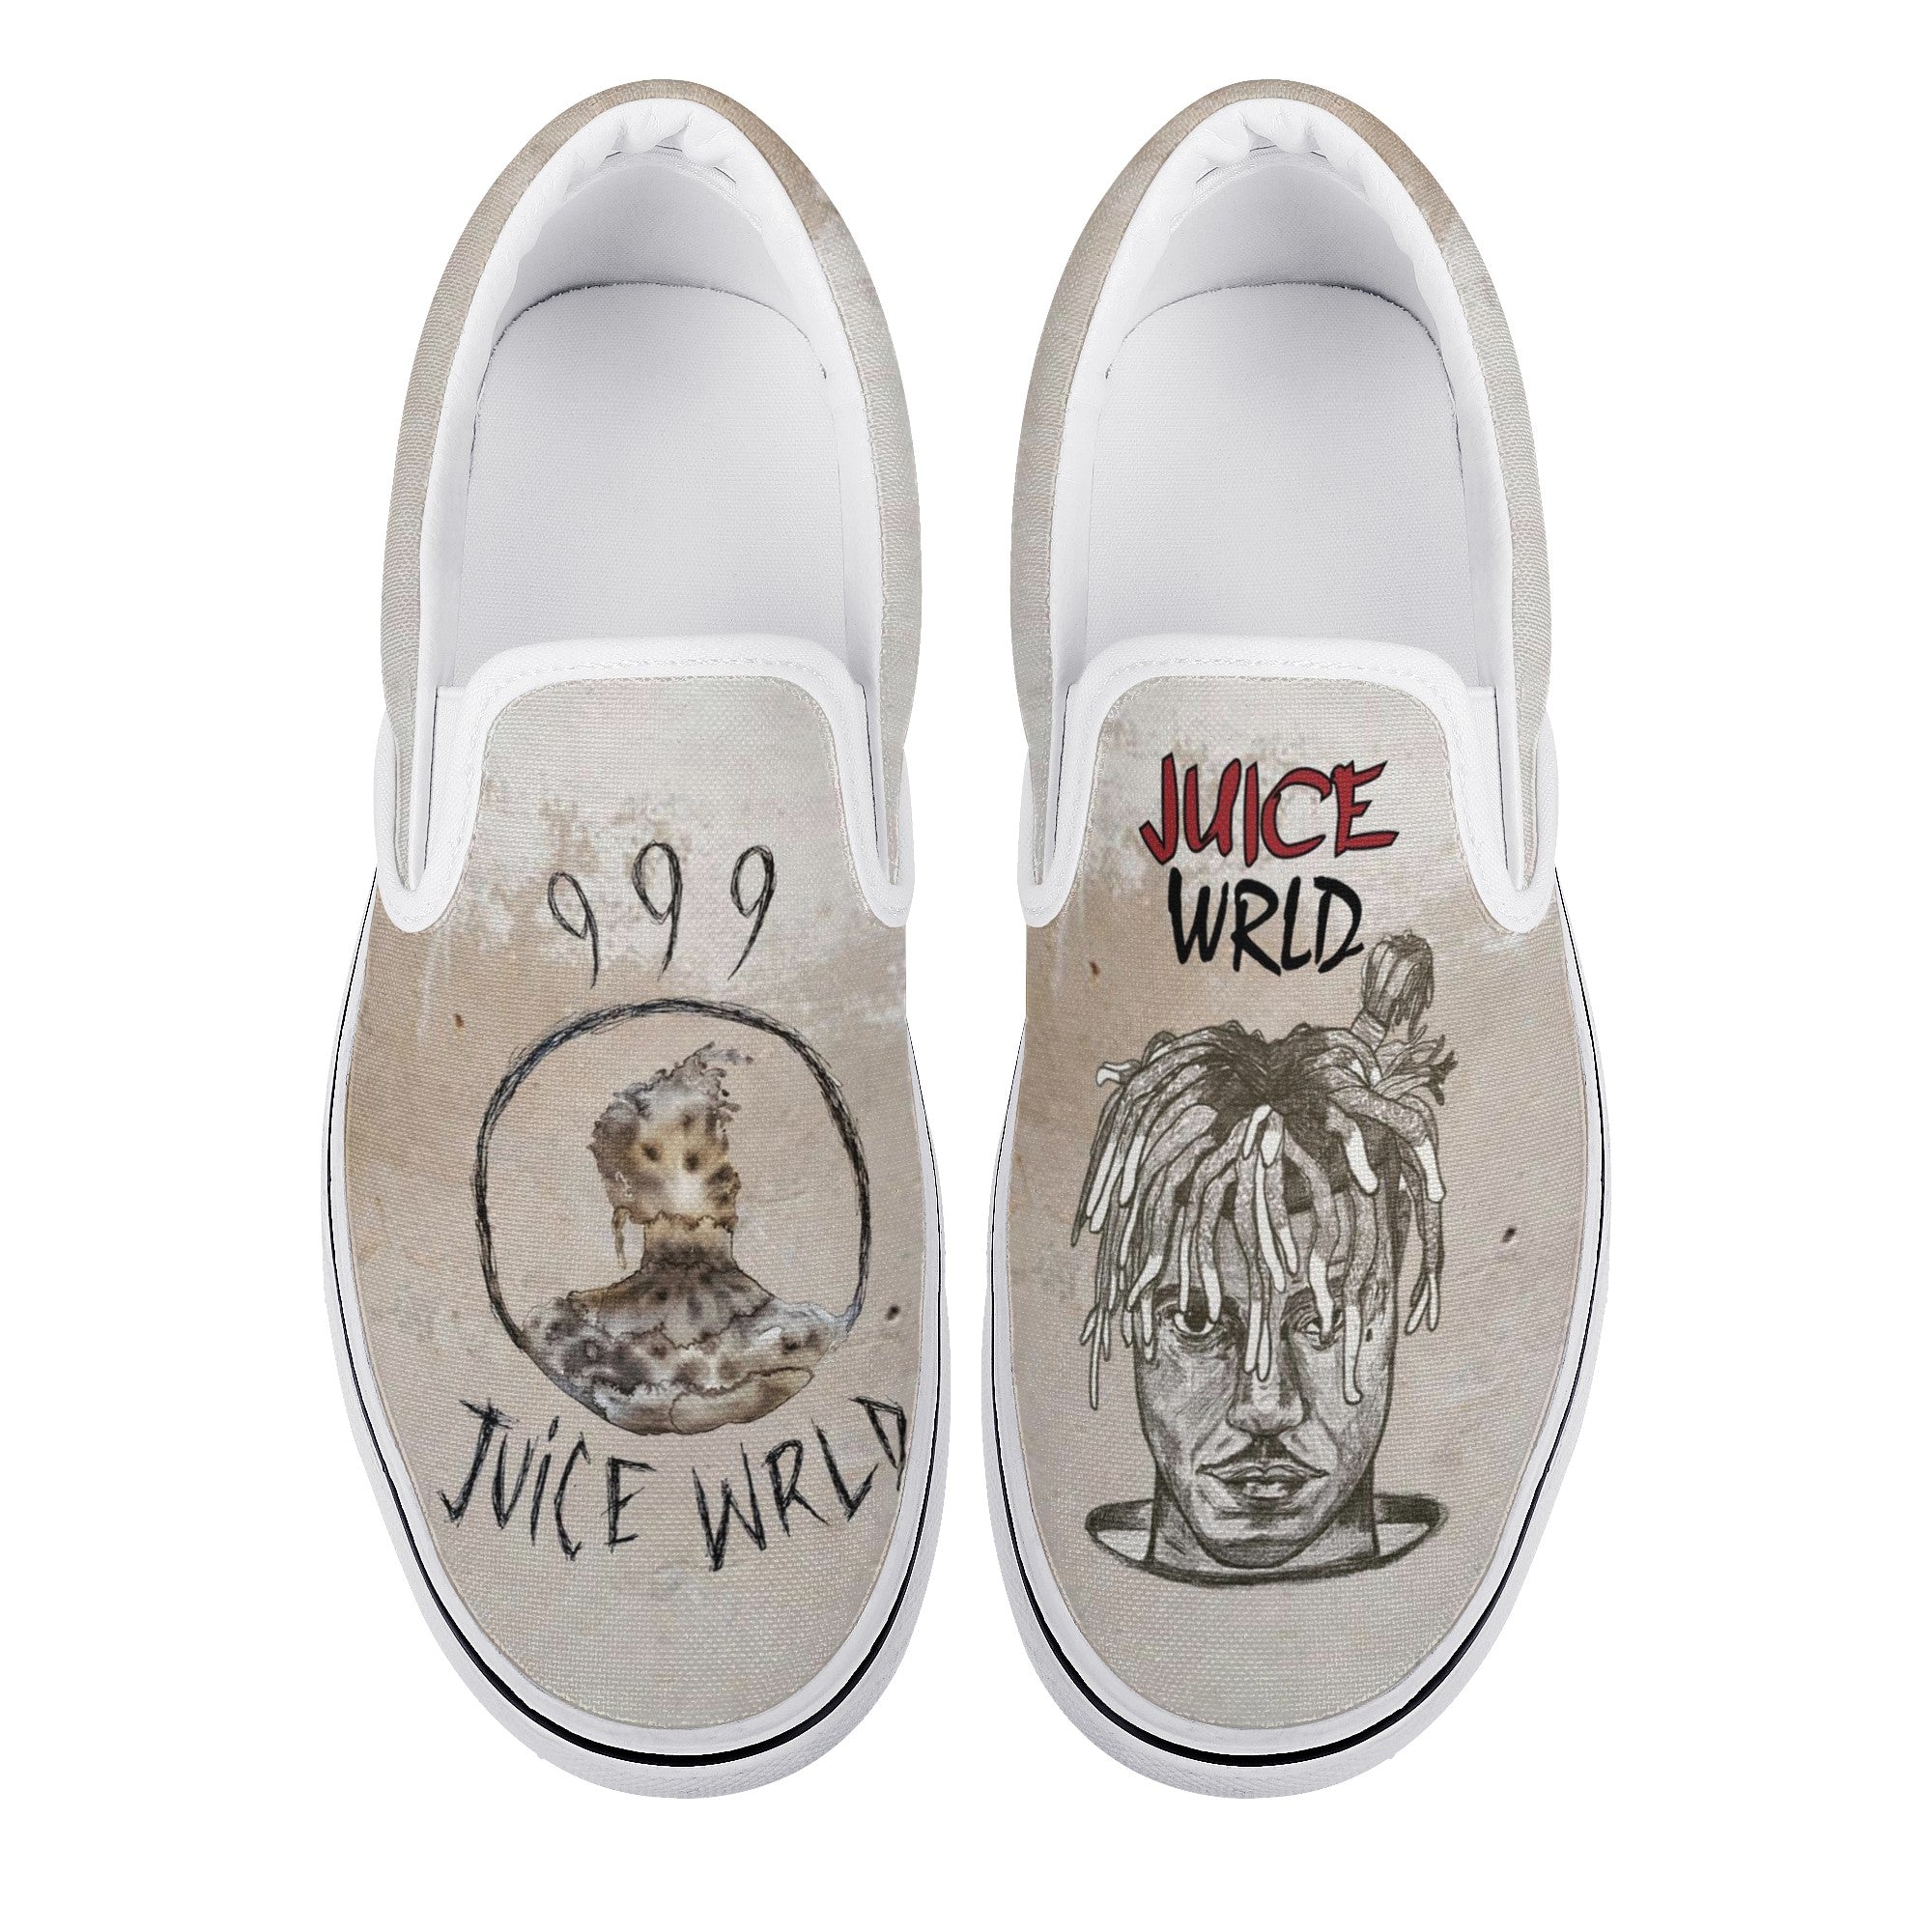 Juice Wrld 999 Collection  Shoes & Clothing - noxfan